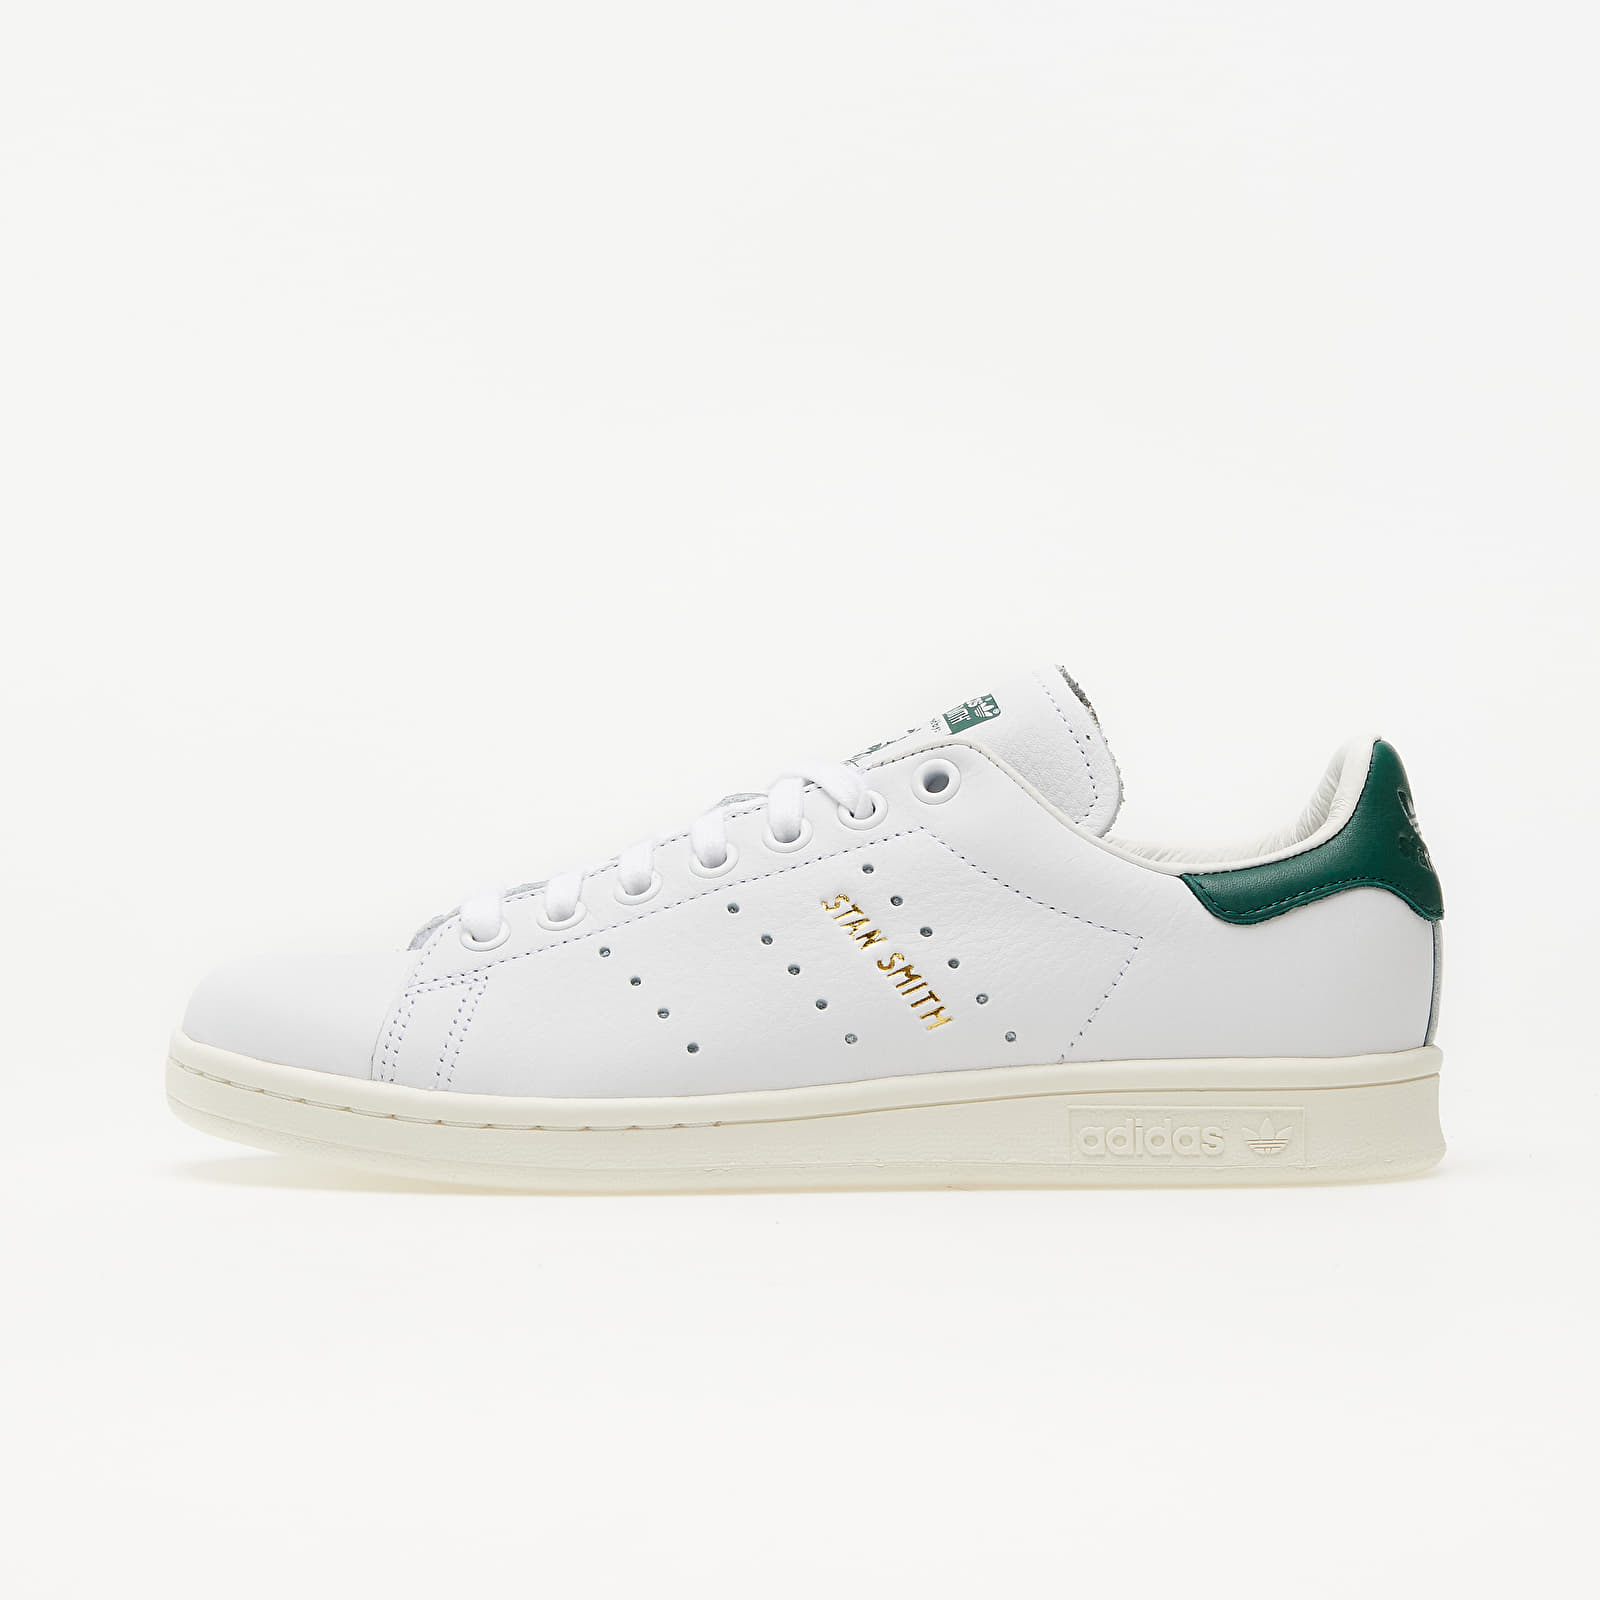 Chaussures et baskets homme adidas Stan Smith Ftw White/ Ftw White/ Collegiate Green